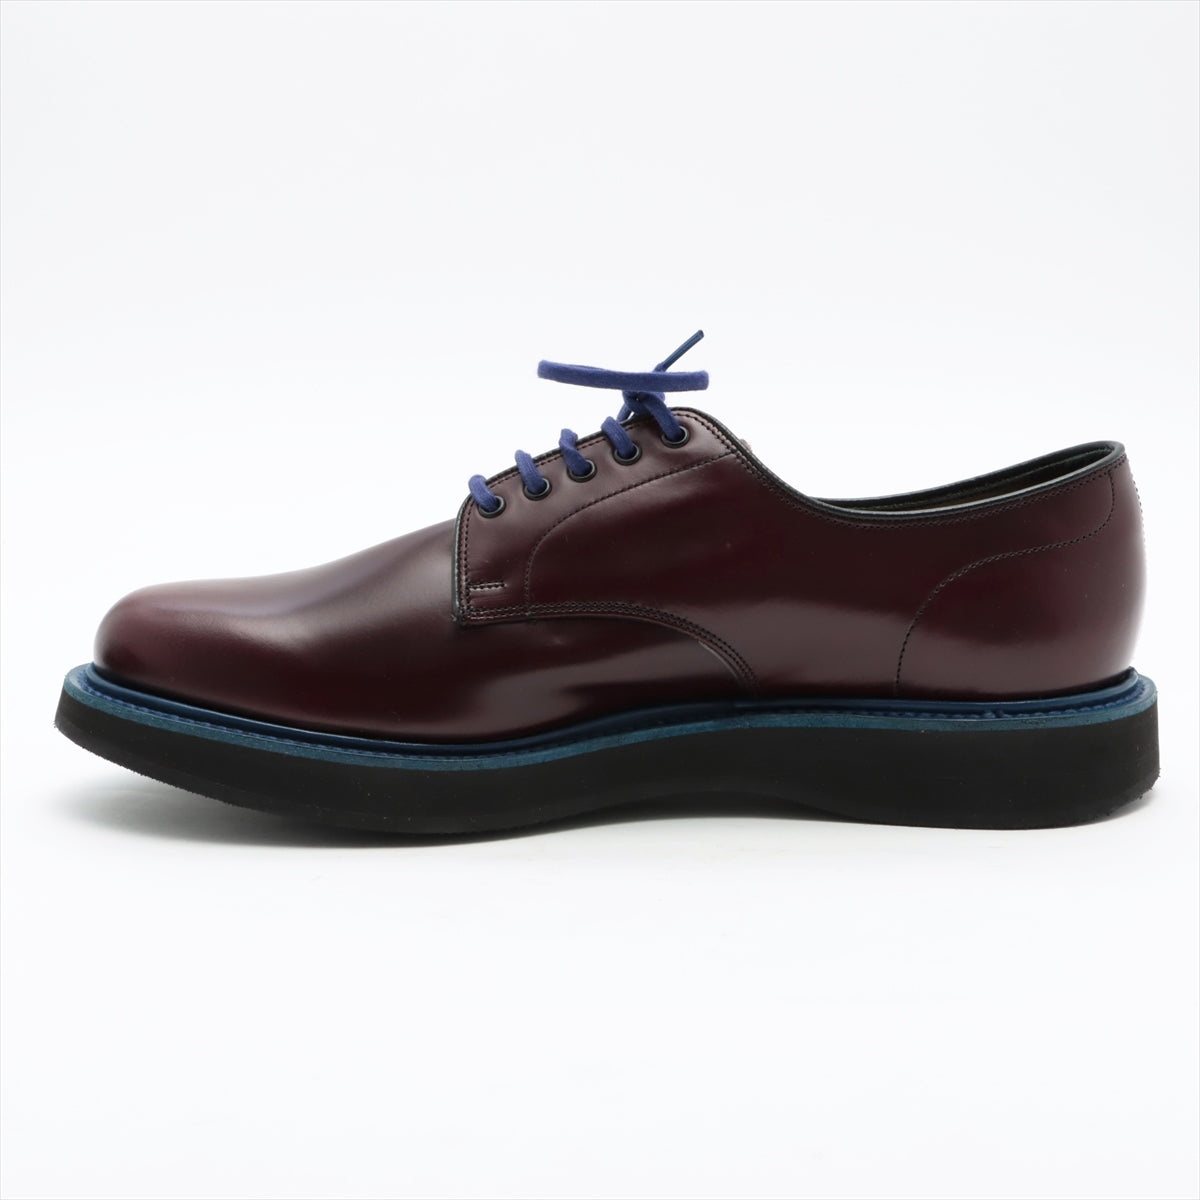 Church's Layton Leather Leather shoes Unknown size Men's Bordeaux Typographical thread